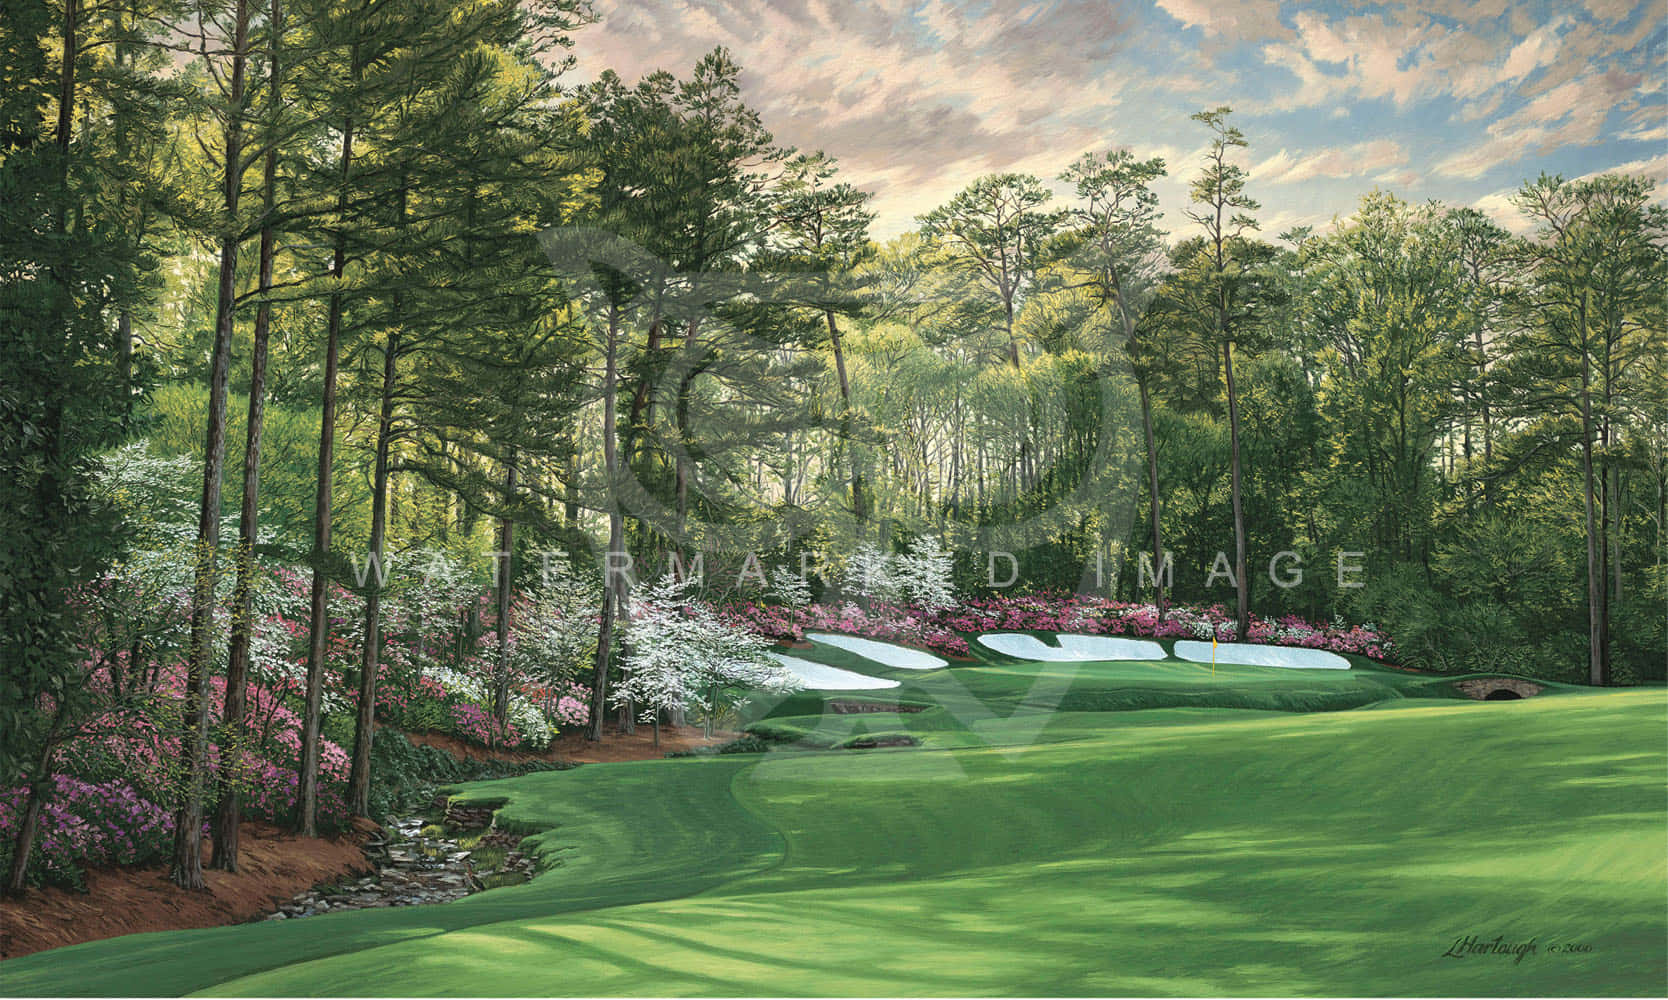 "Start Your Masters Sunday on Augusta National's Iphone" Wallpaper